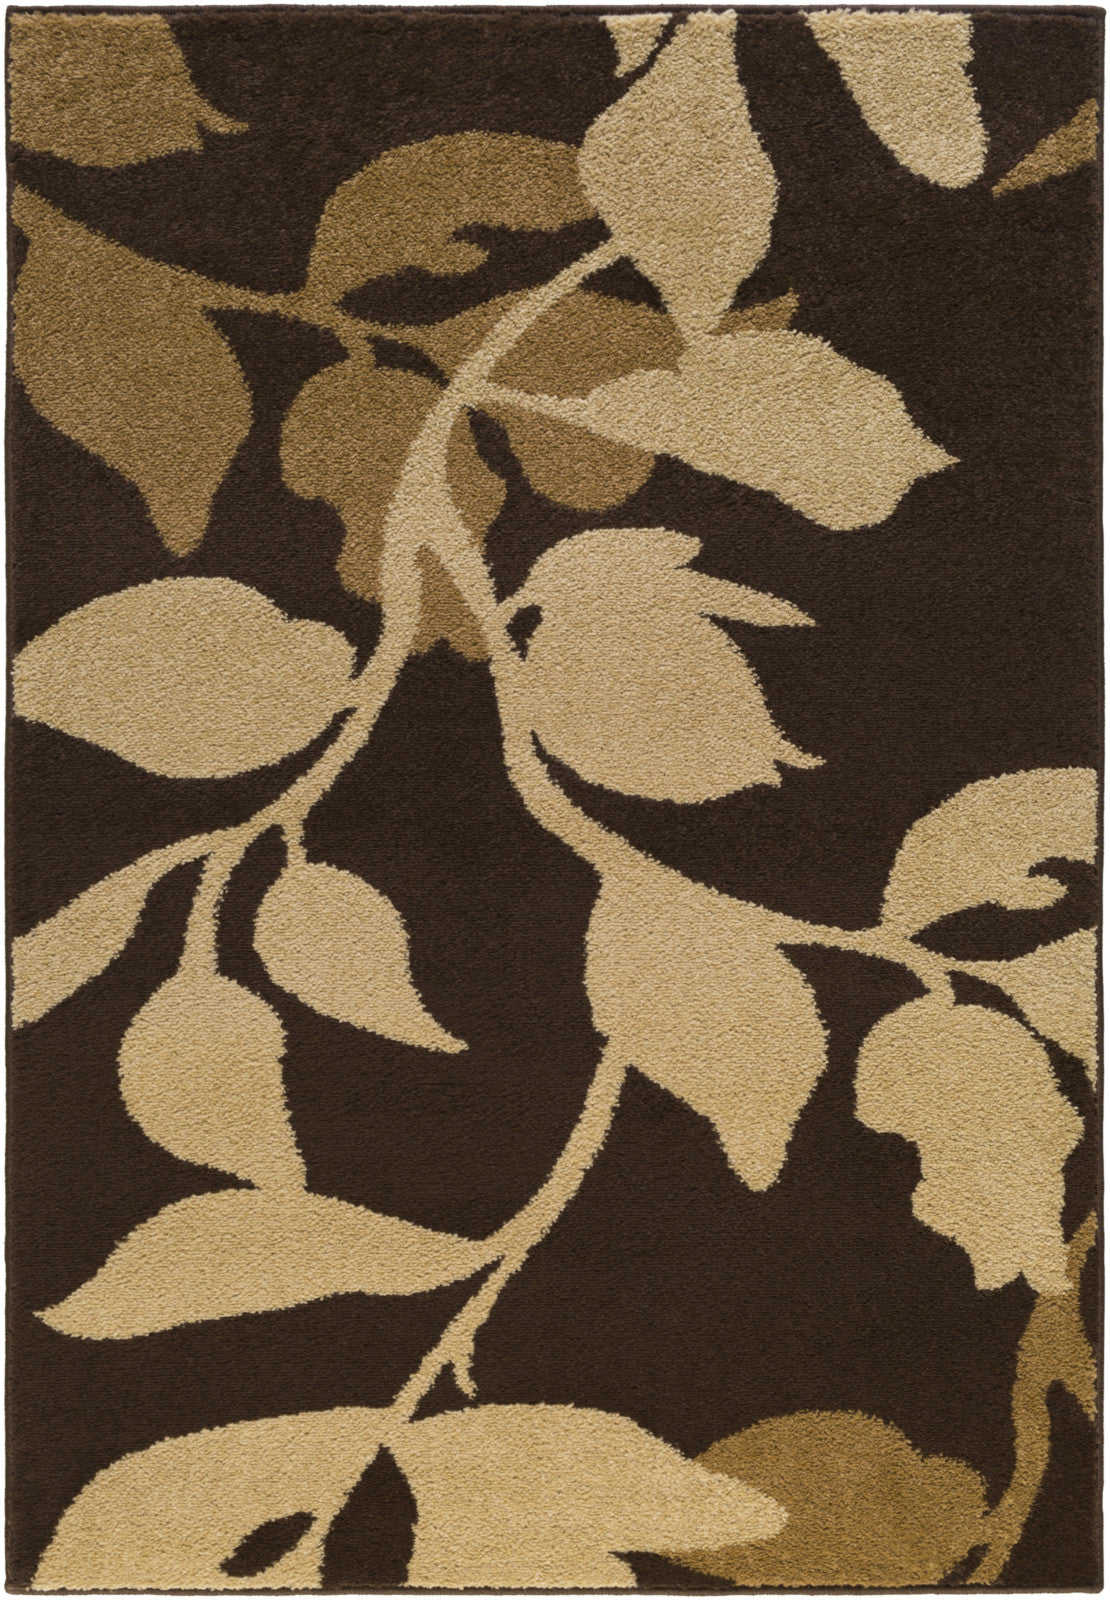 Surya River Home RVH-1007 Brown Area Rug by Mossy Oak main image